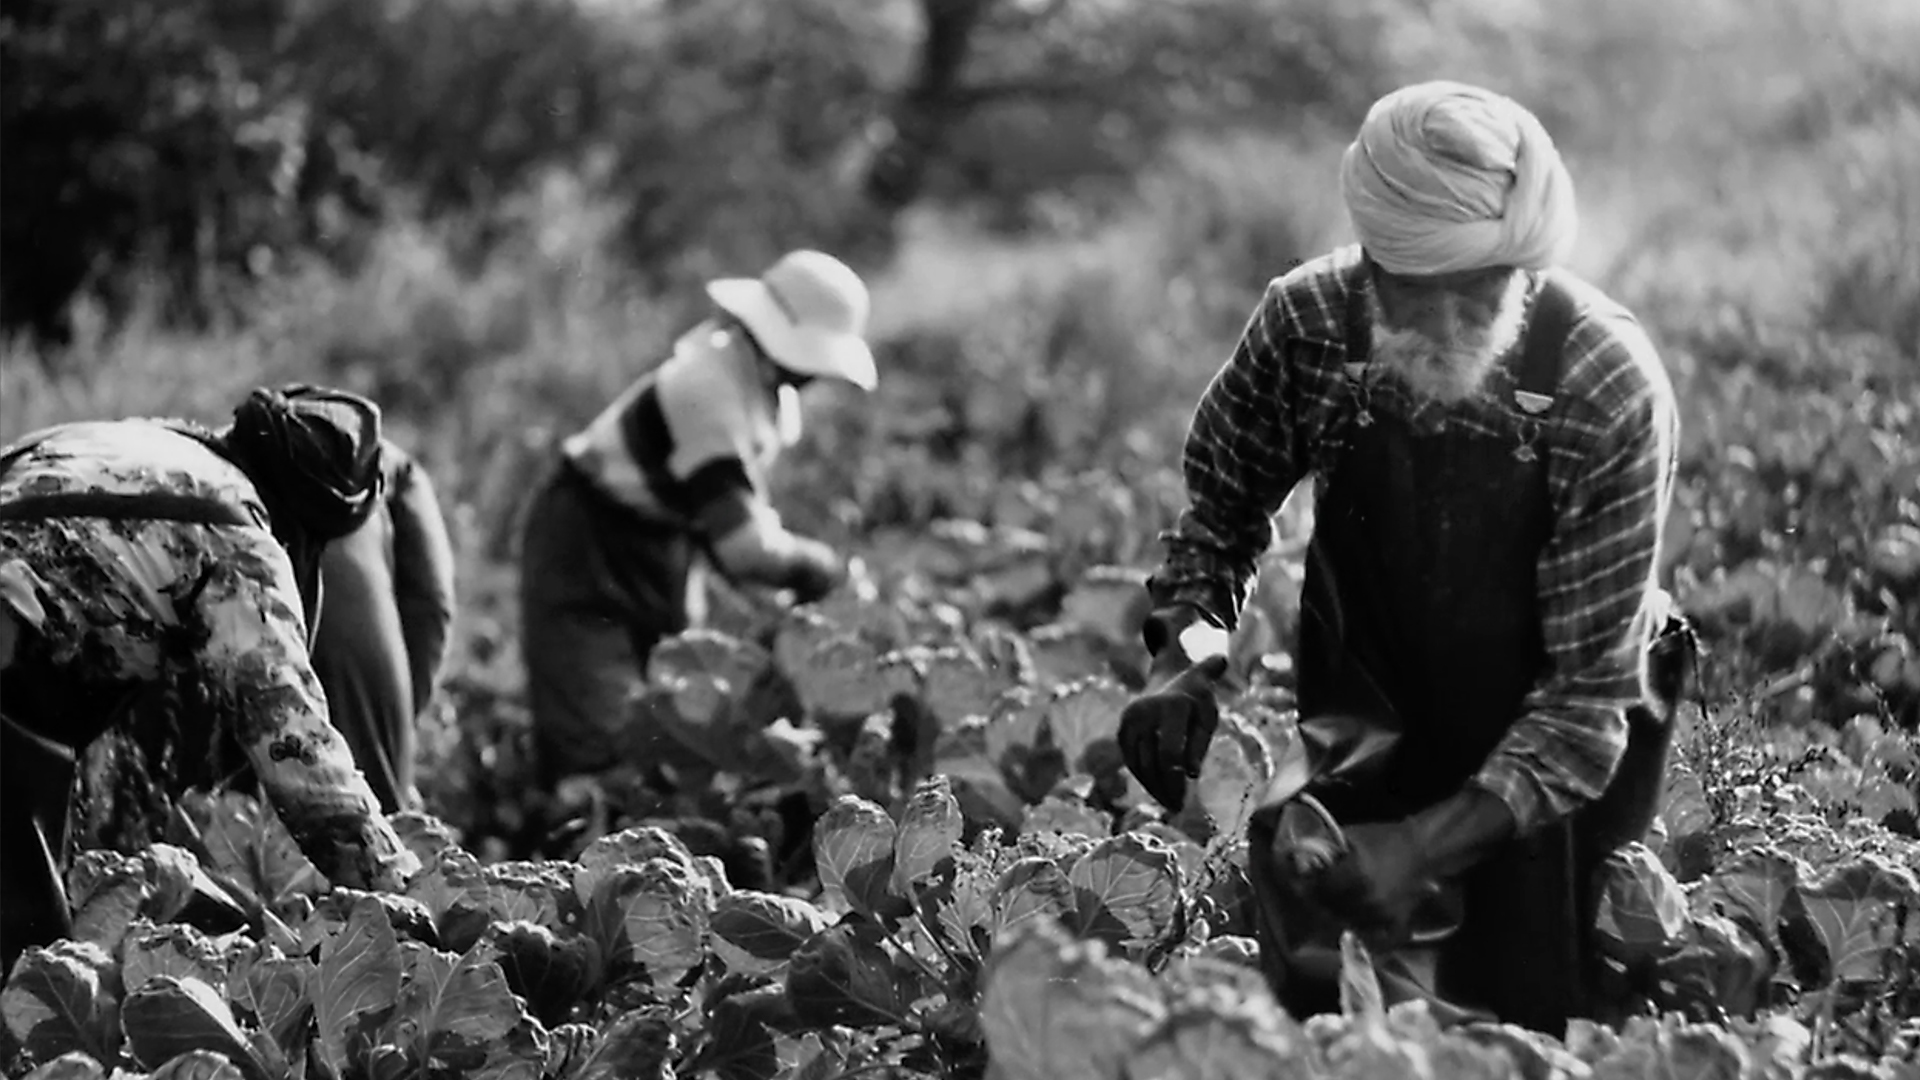 Working People: A History of Labour in British Columbia - E29 - Farmworkers